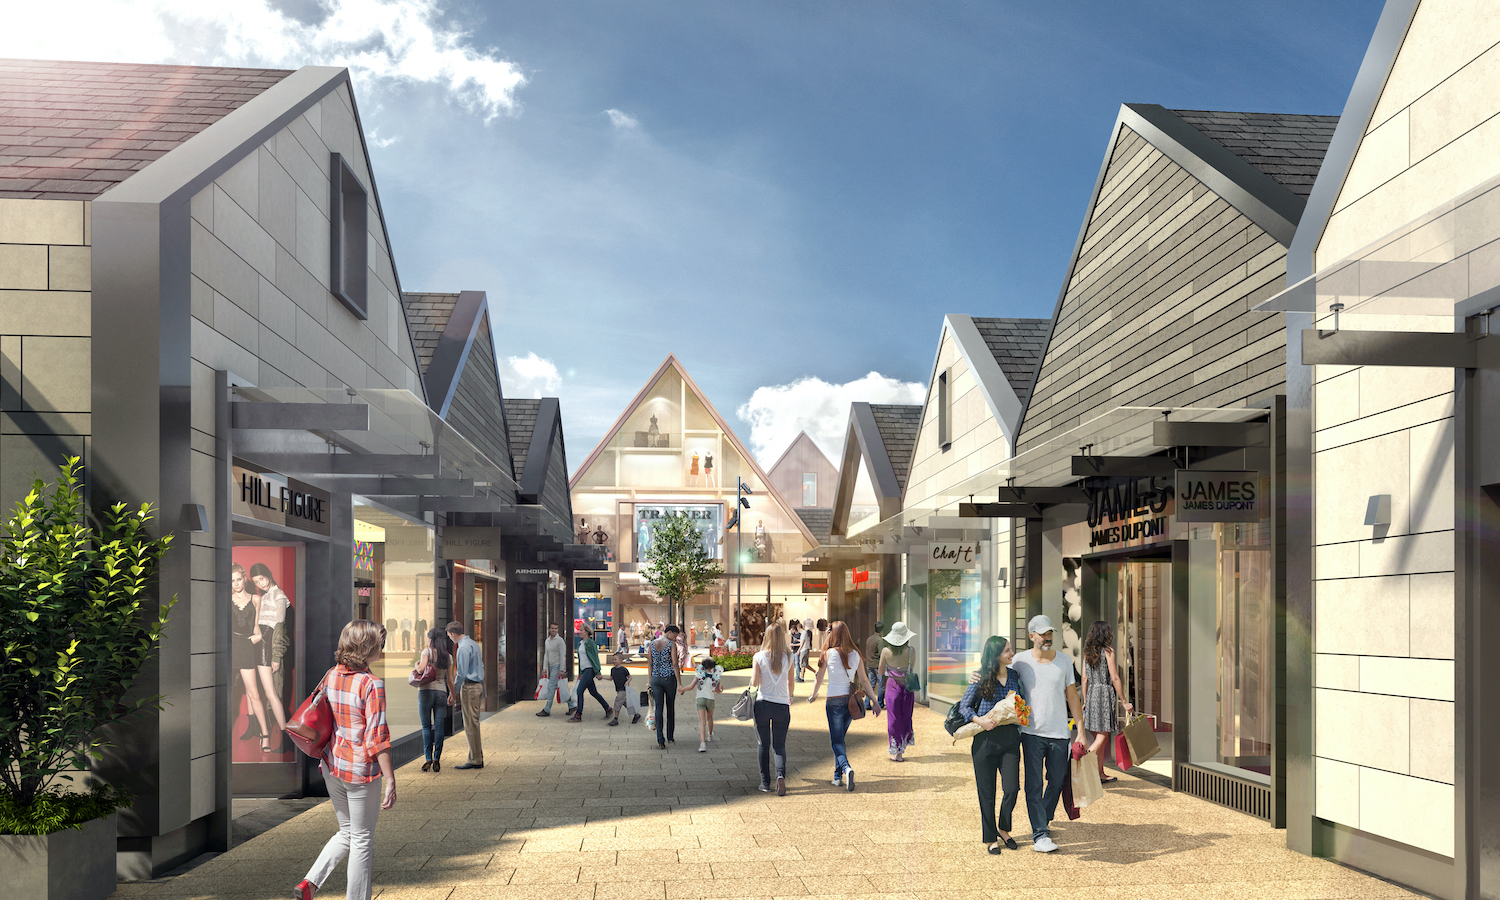 Armani, Hugo Boss and Moss Bros take space in Grantham Designer Outlet Village